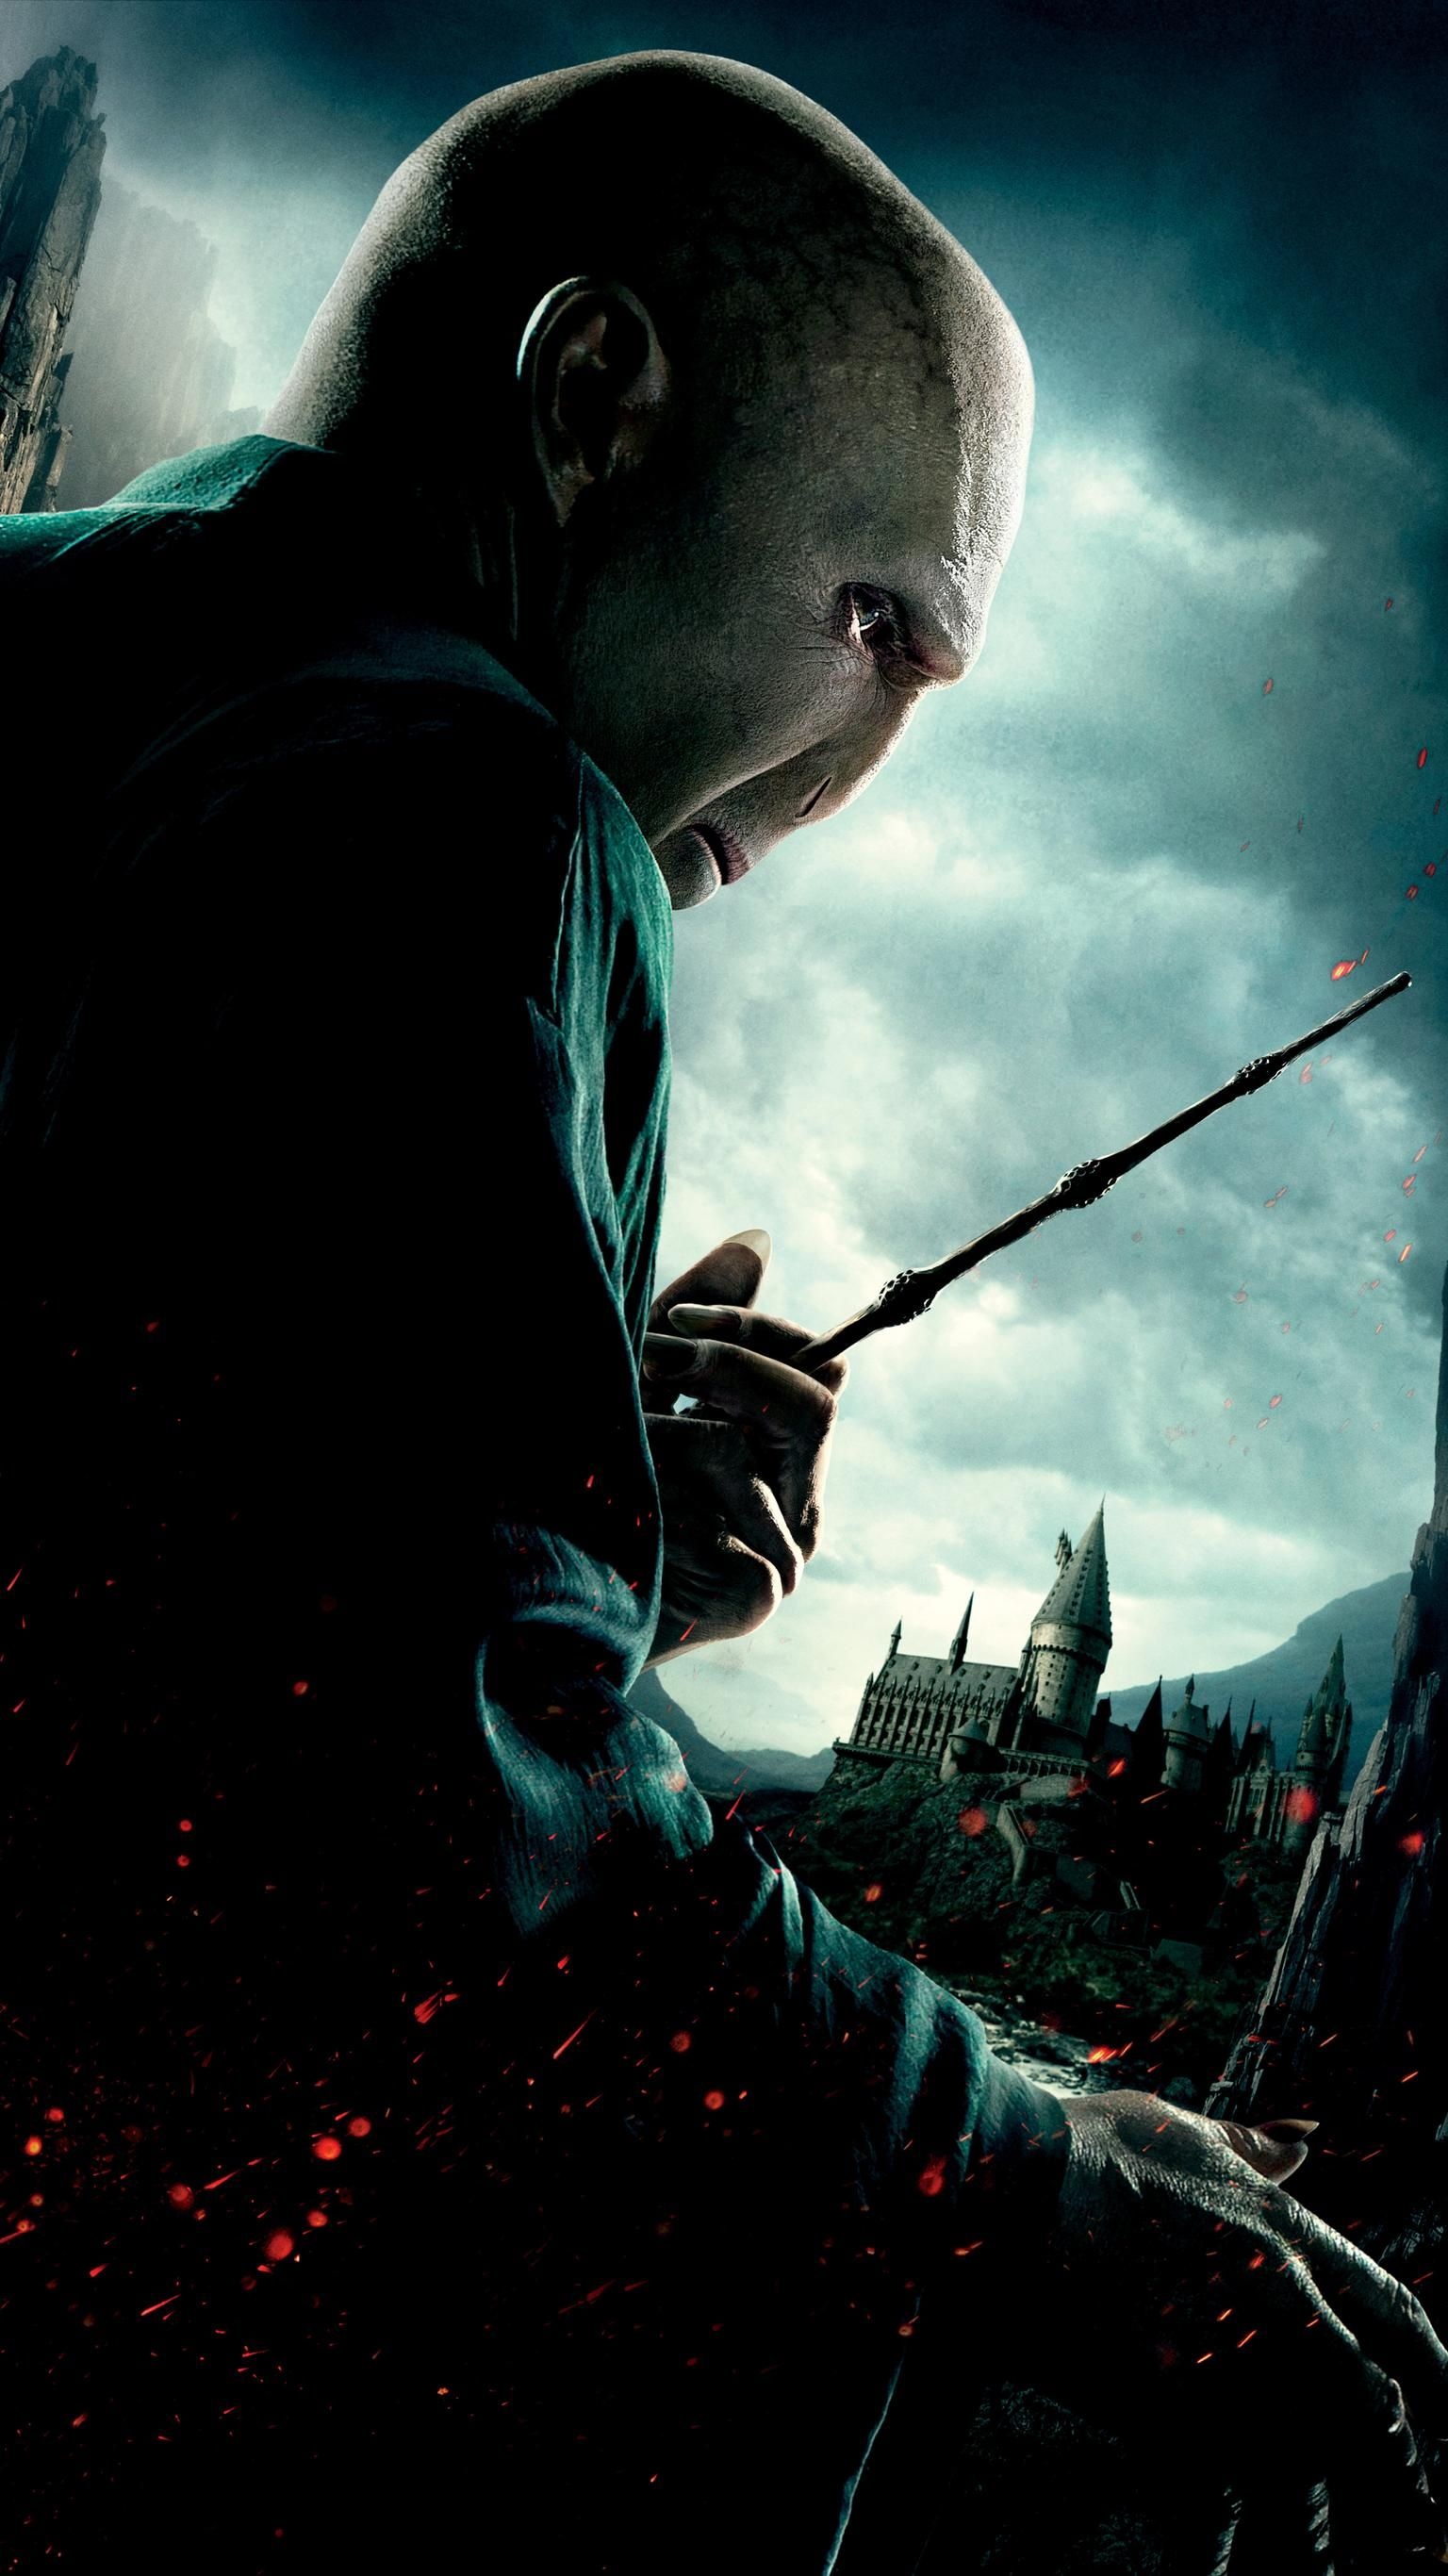 HD wallpaper, Phone Wallpaper, Phone Hd Lord Voldemort Background Photo, Harry Potter, Deathly Hallows Part 1, 1540X2740 Hd Phone